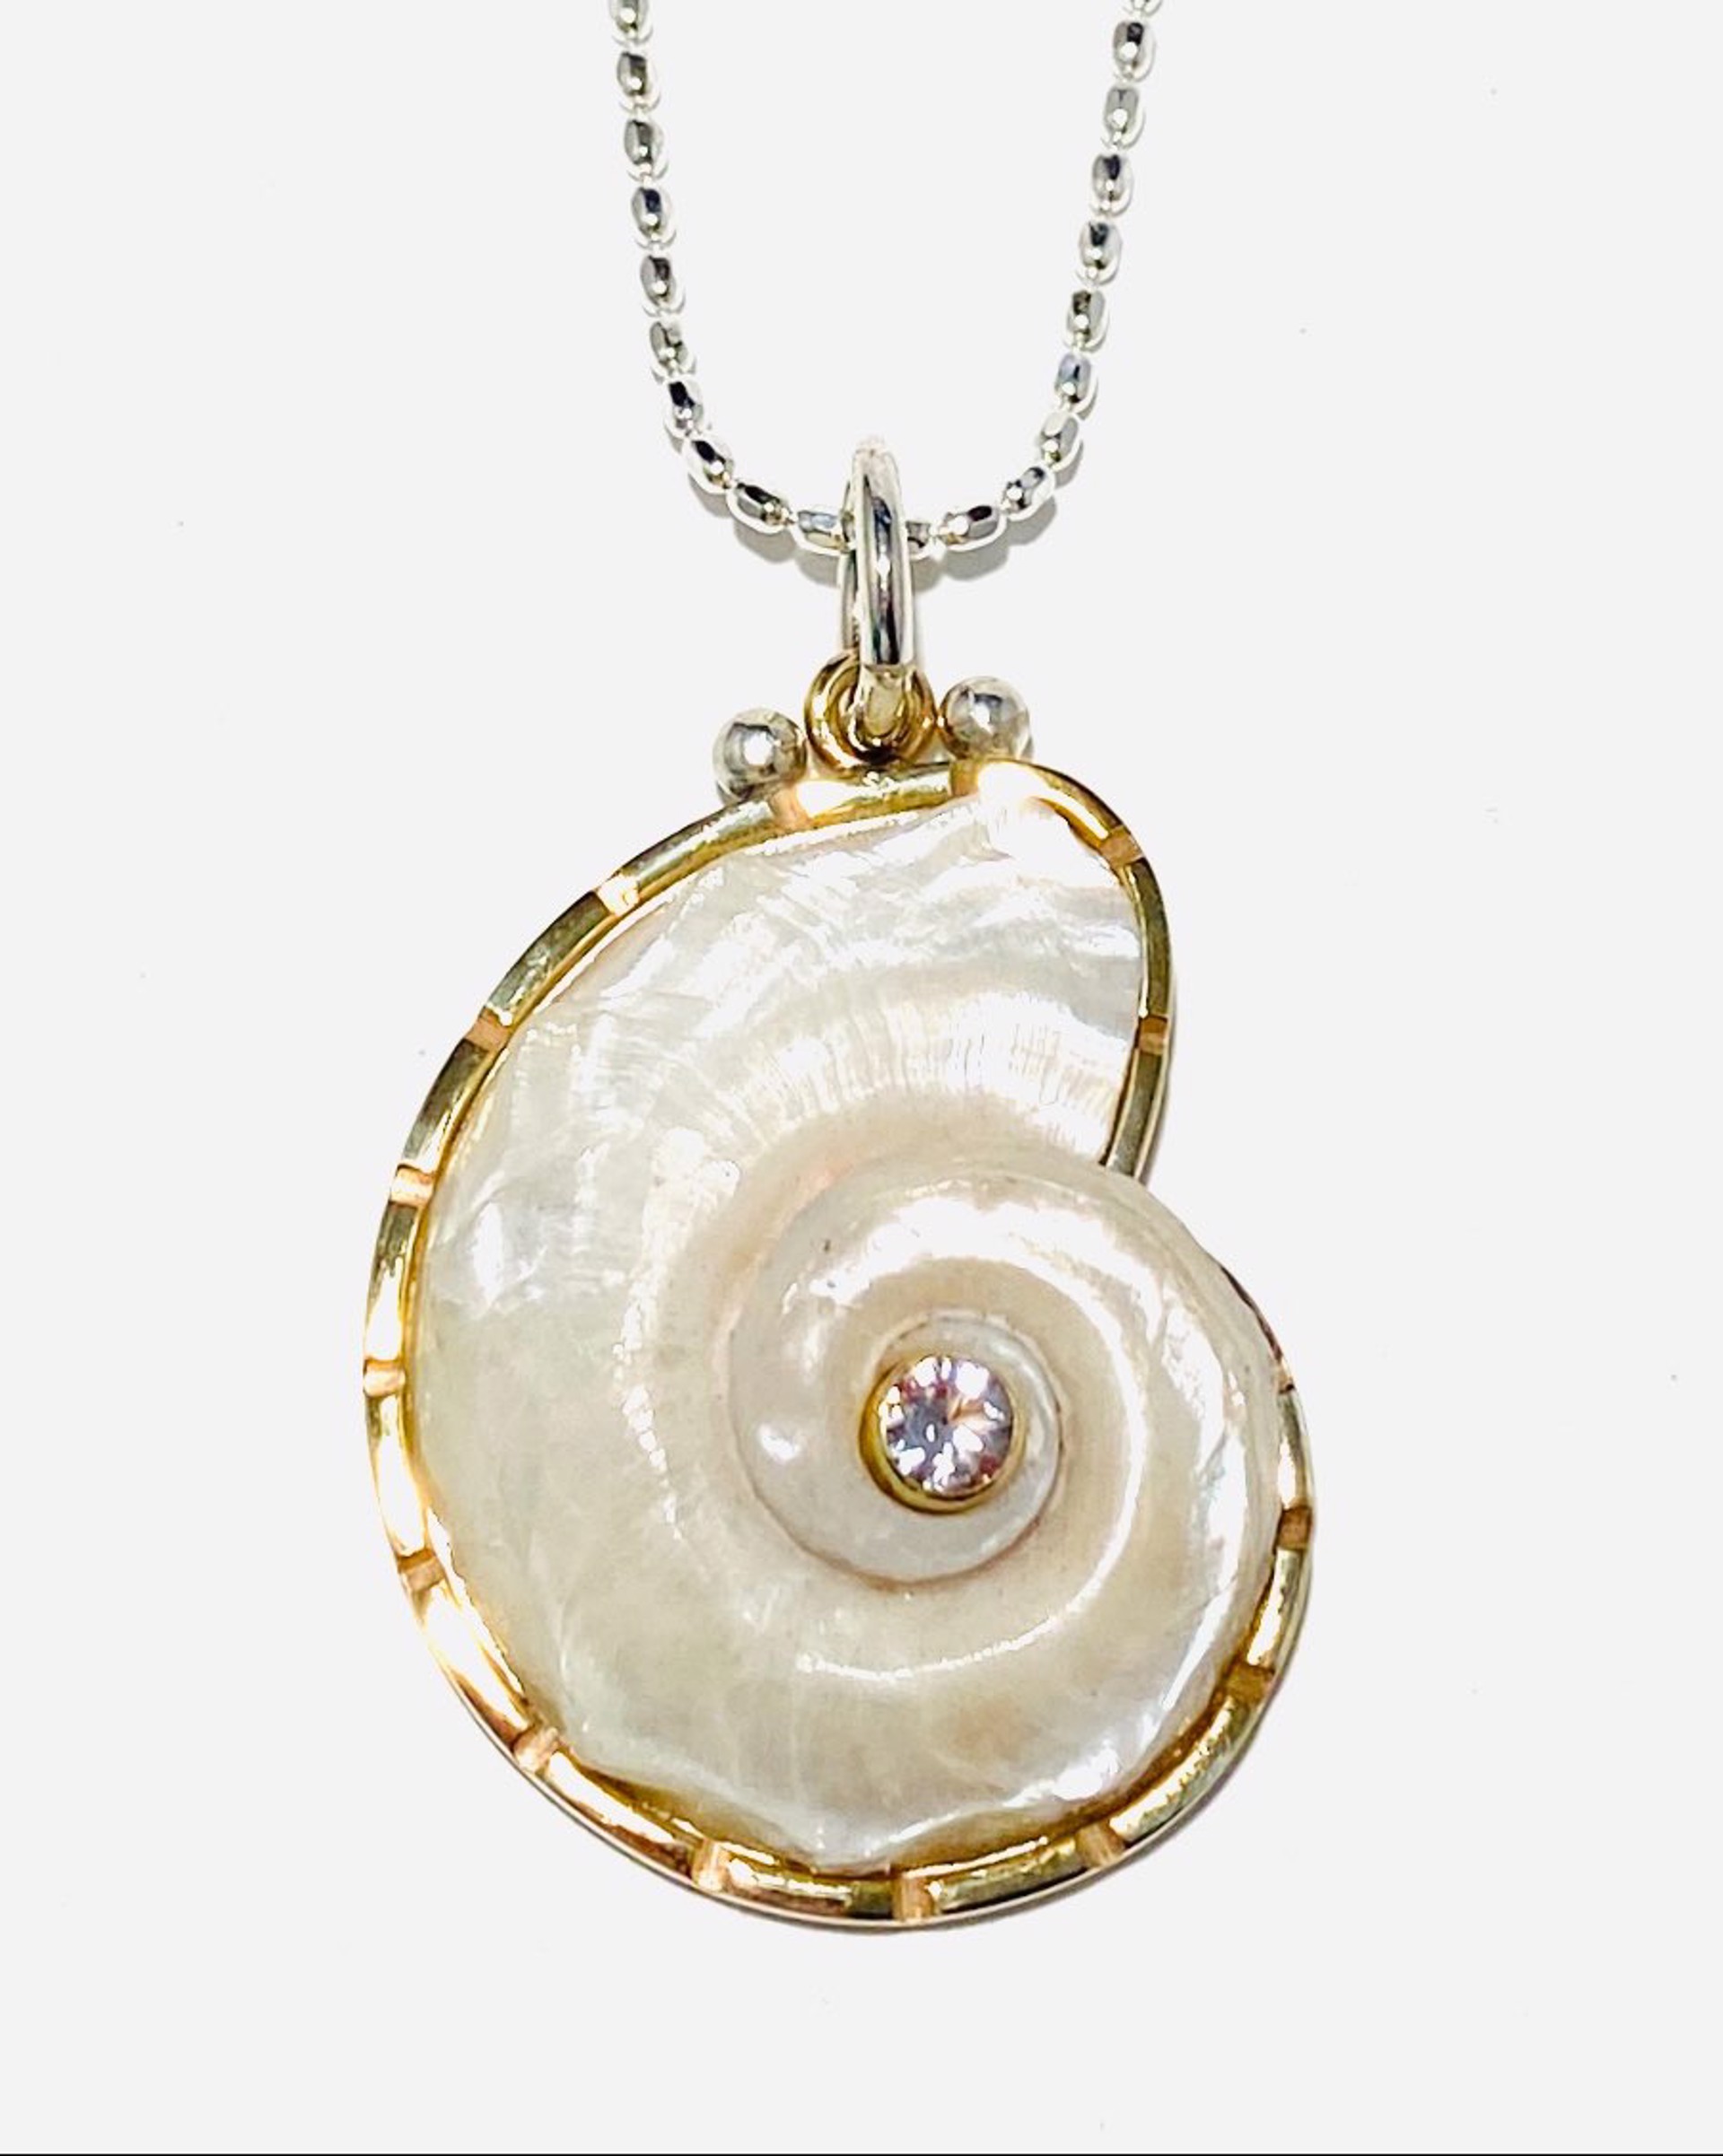 Pearly White Delphinula White Topaz  Pendant On 18"Silver Rice Chain Necklace by Barbara Umbel